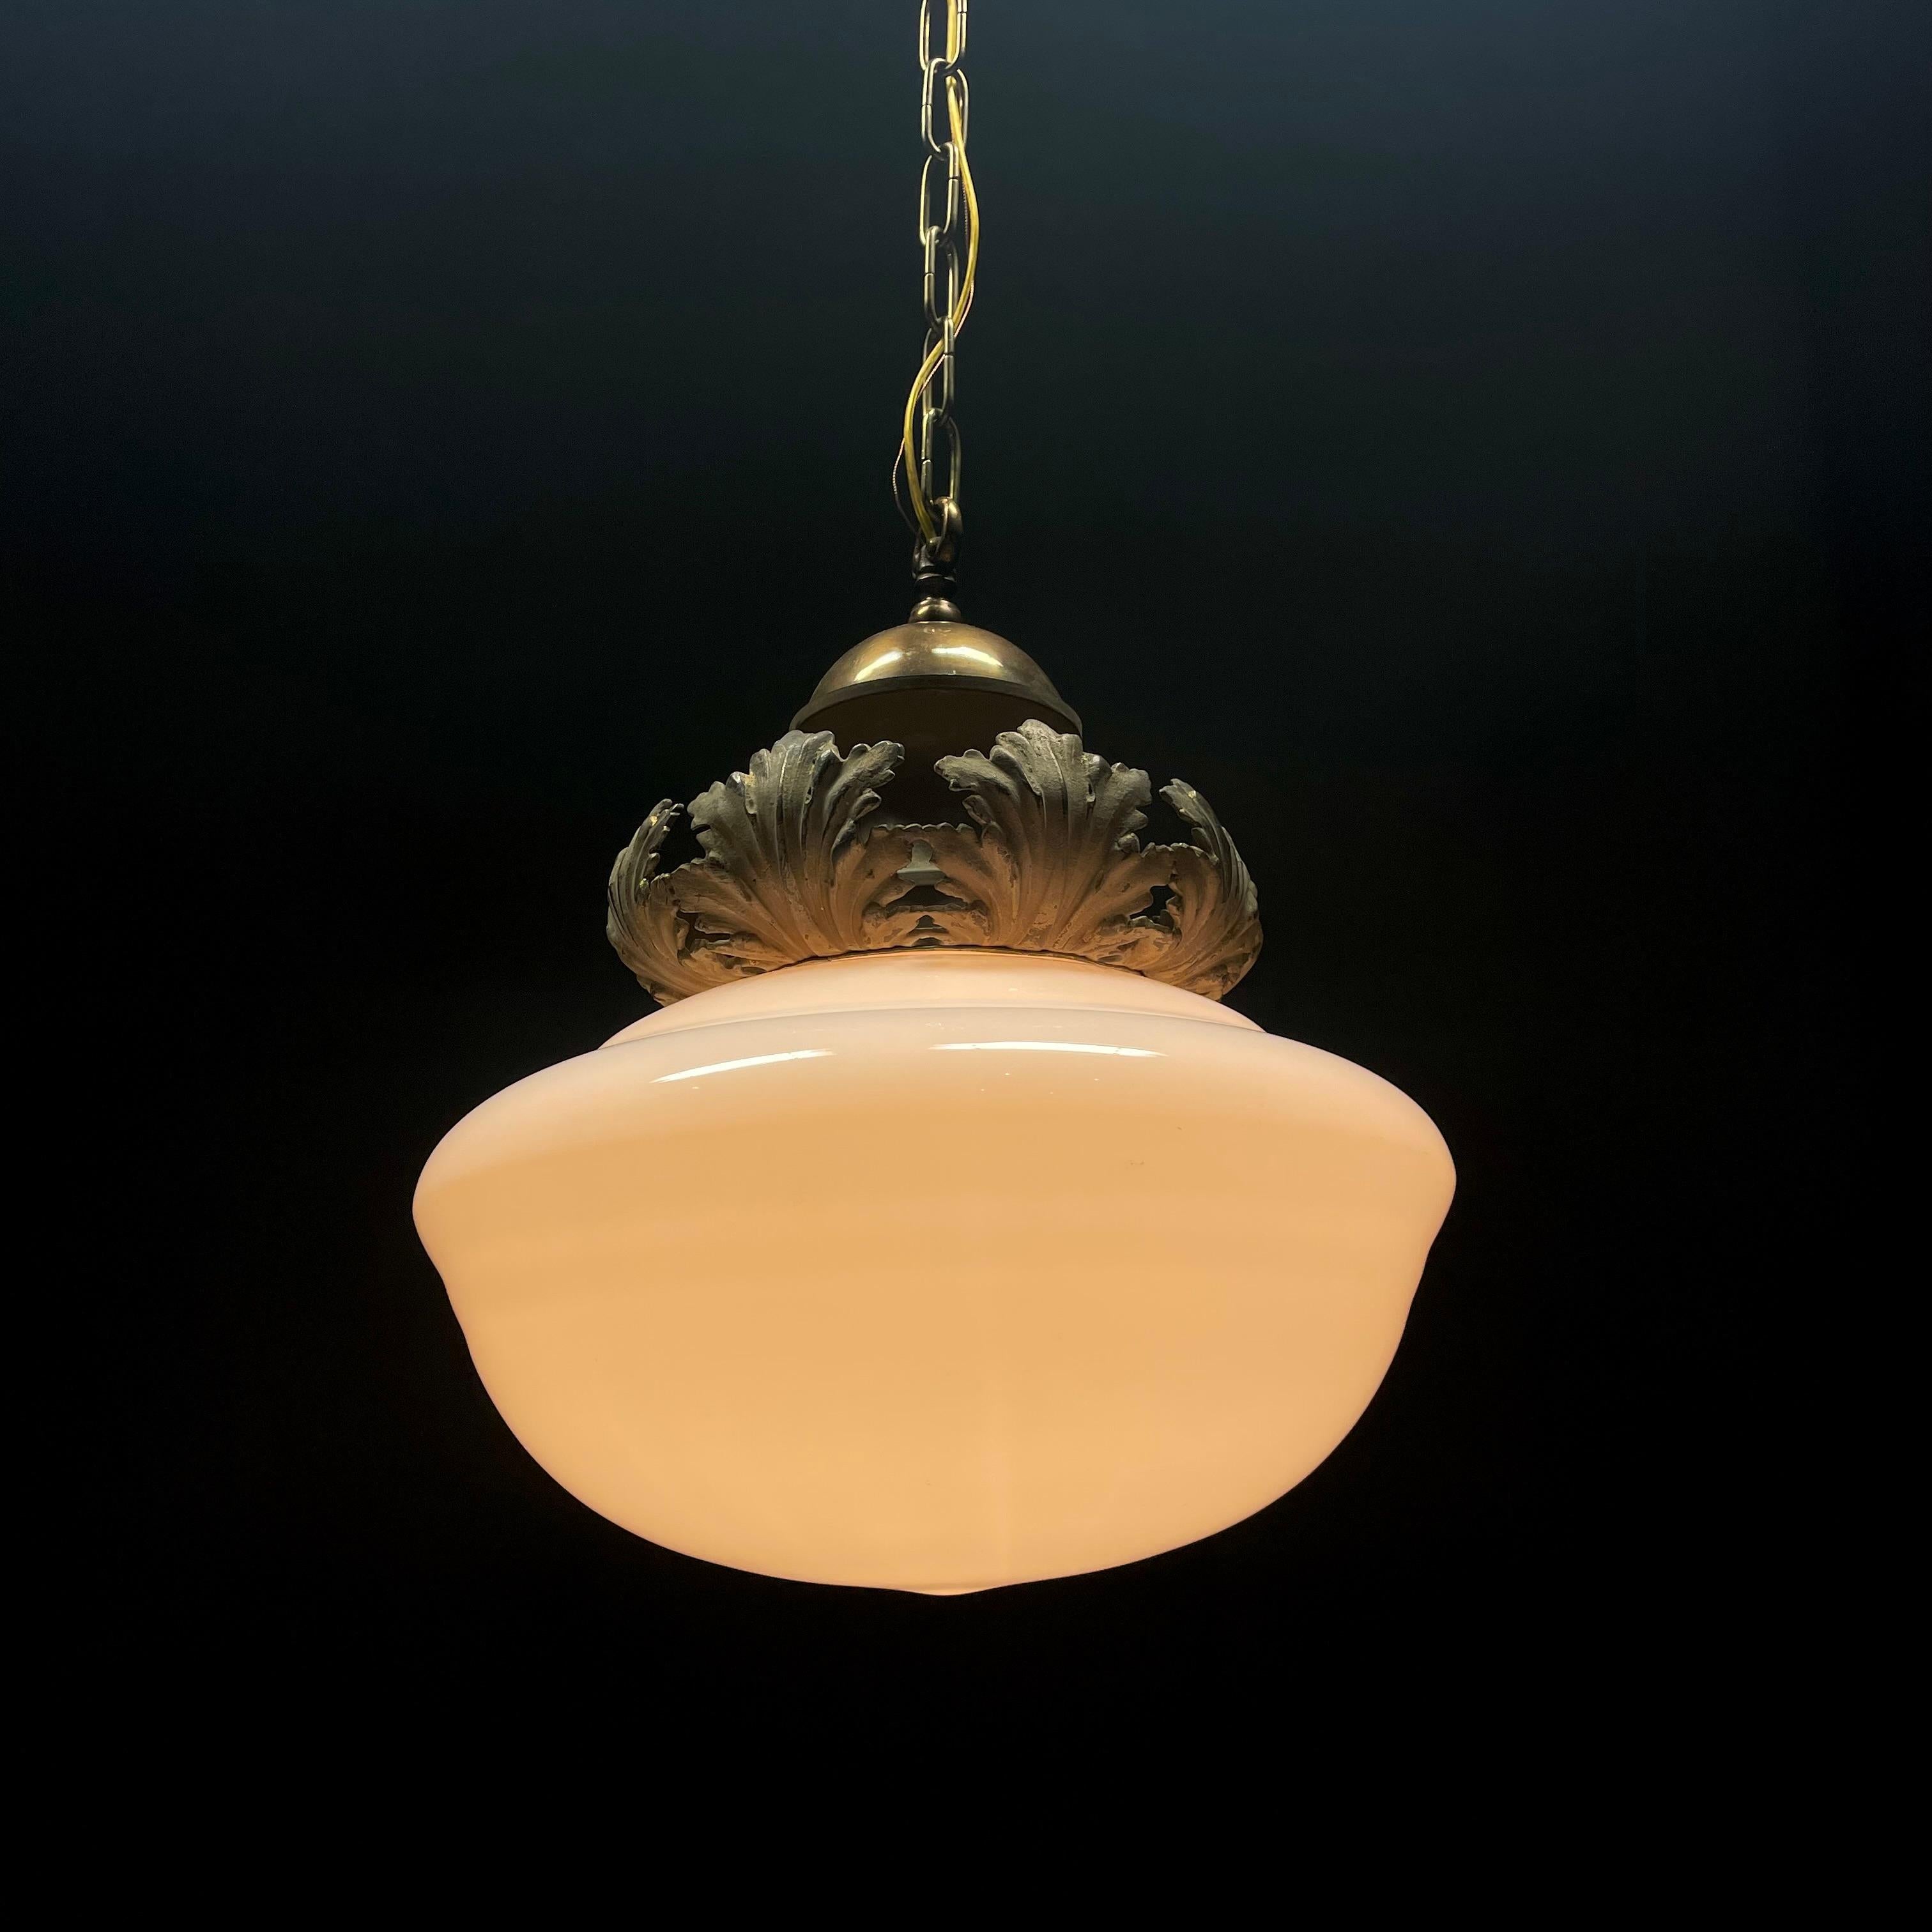 Neoclassical 1910 bronze large milk glass neoclassical pendant light For Sale